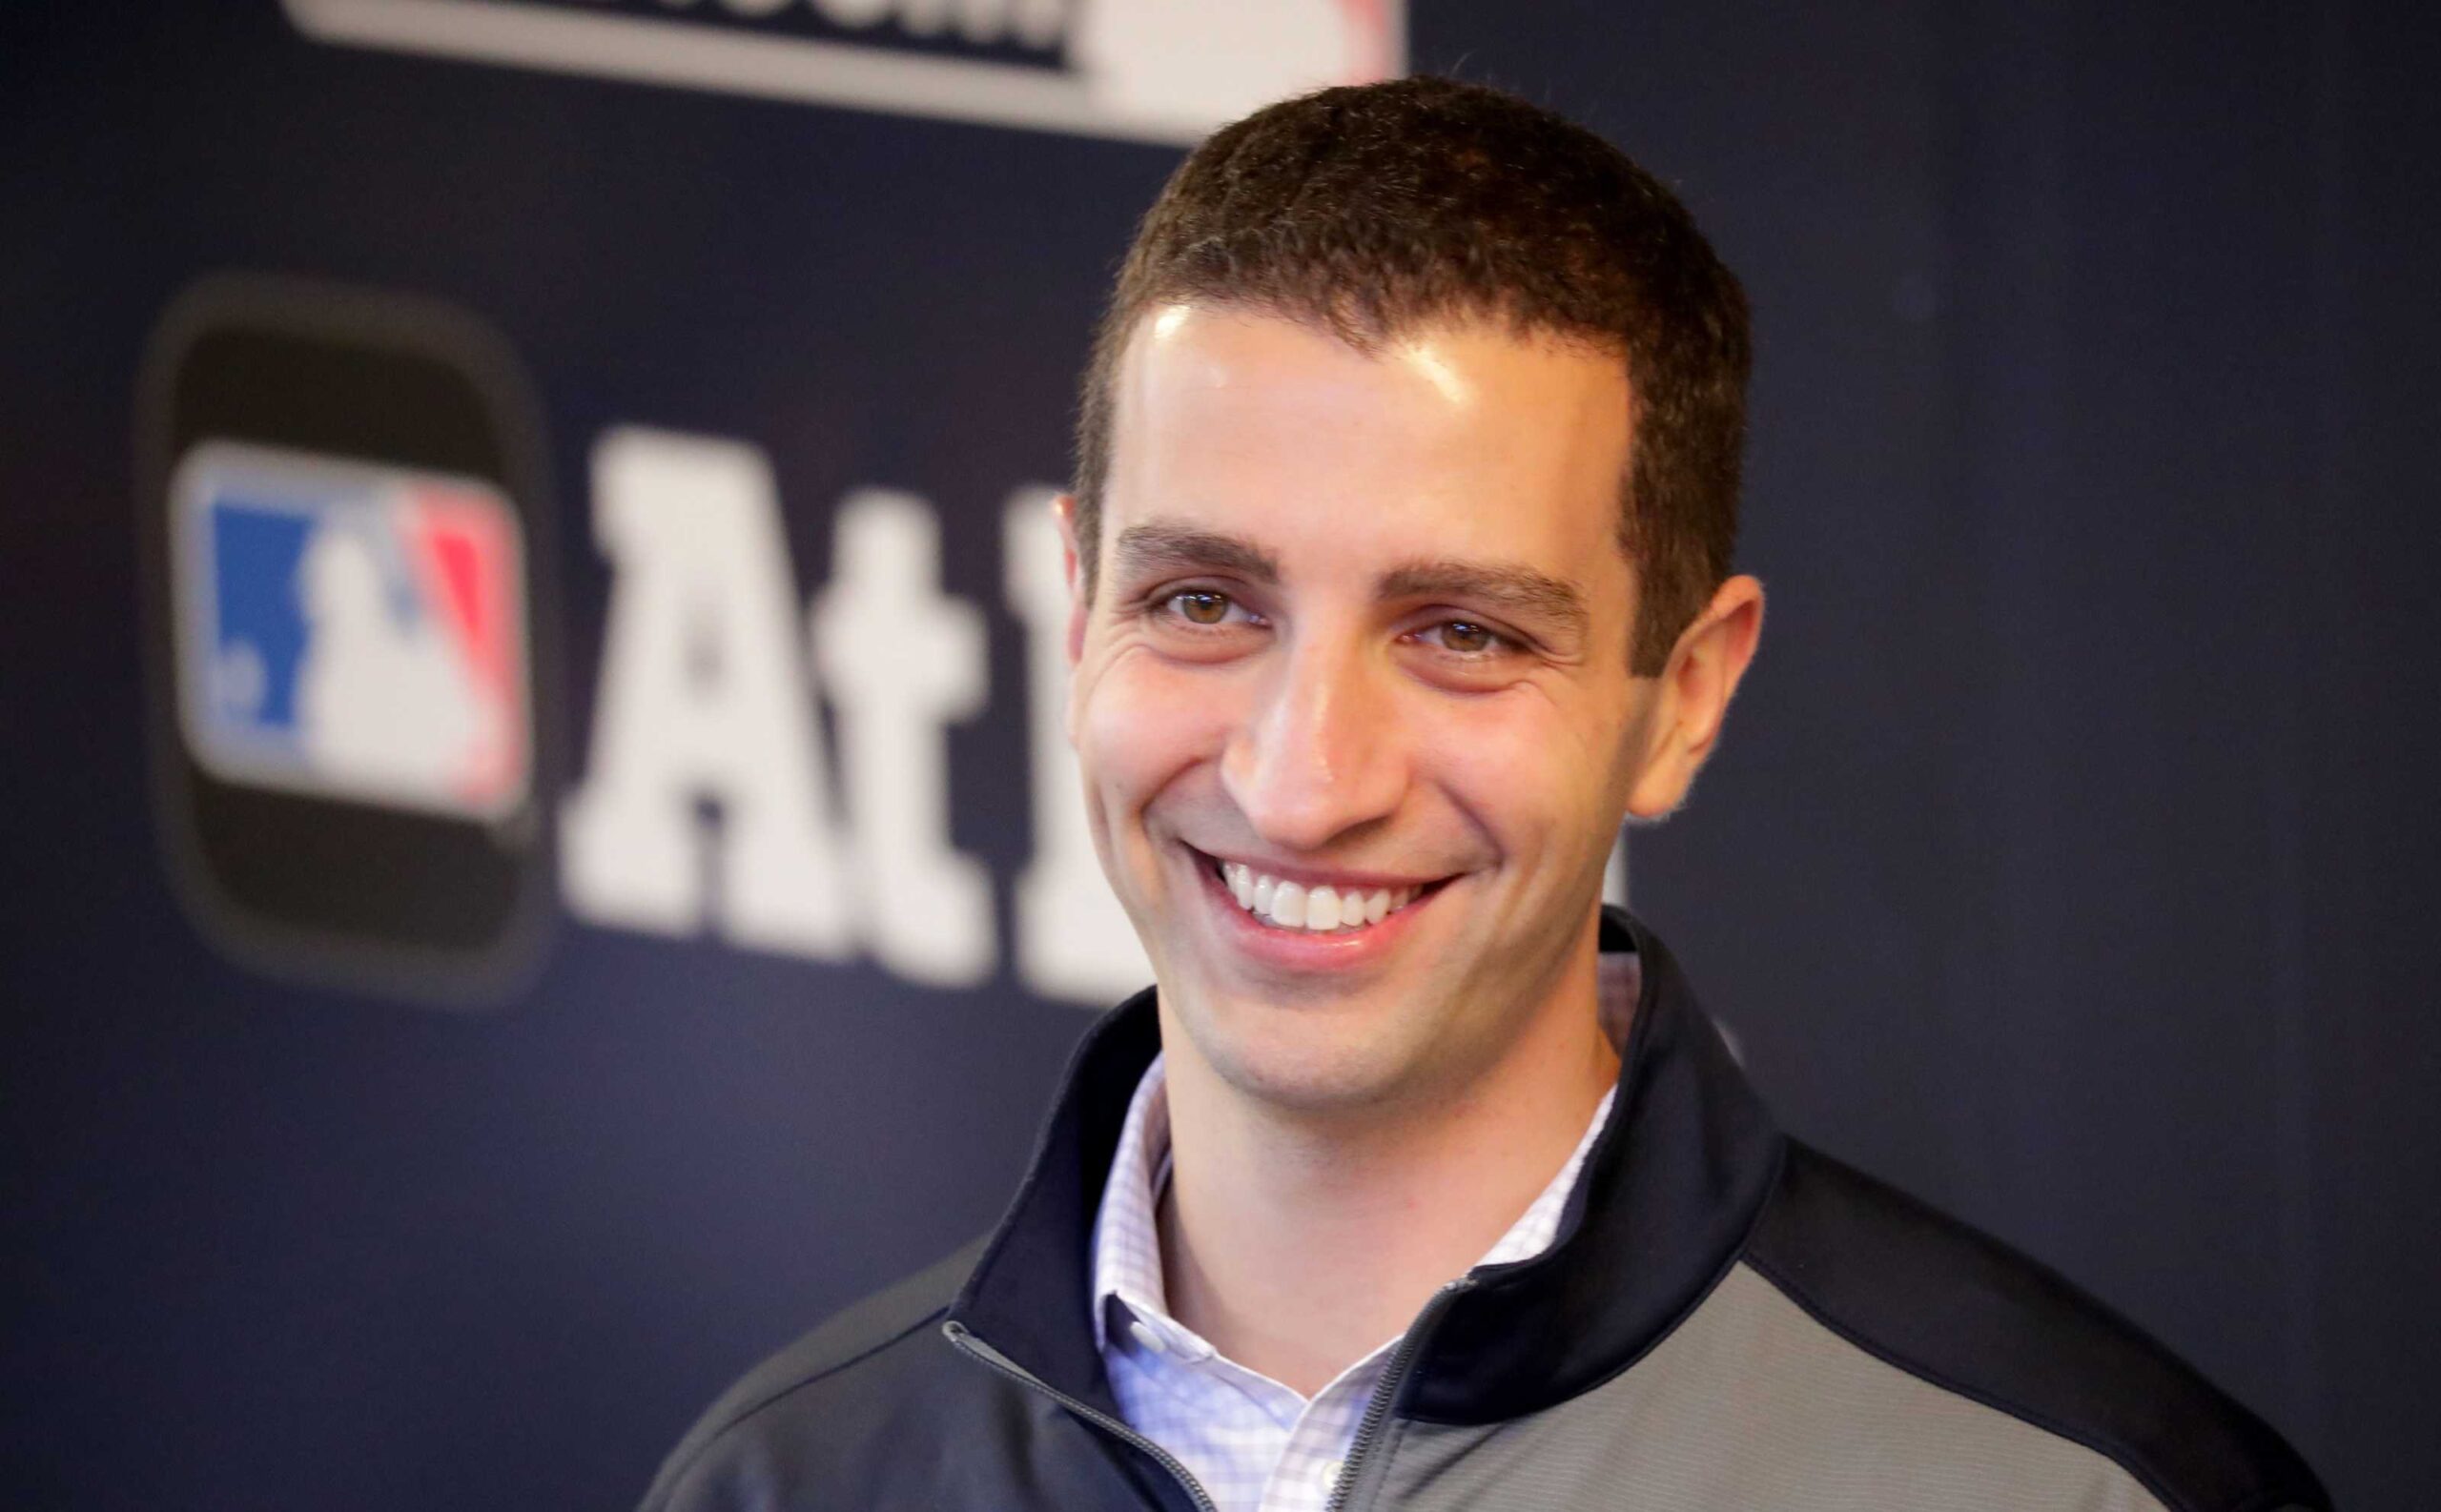 David Stearns Net Worth 2022: How Rich Is The Baseball Executive? Meet His Wife Whitney Ann Lee